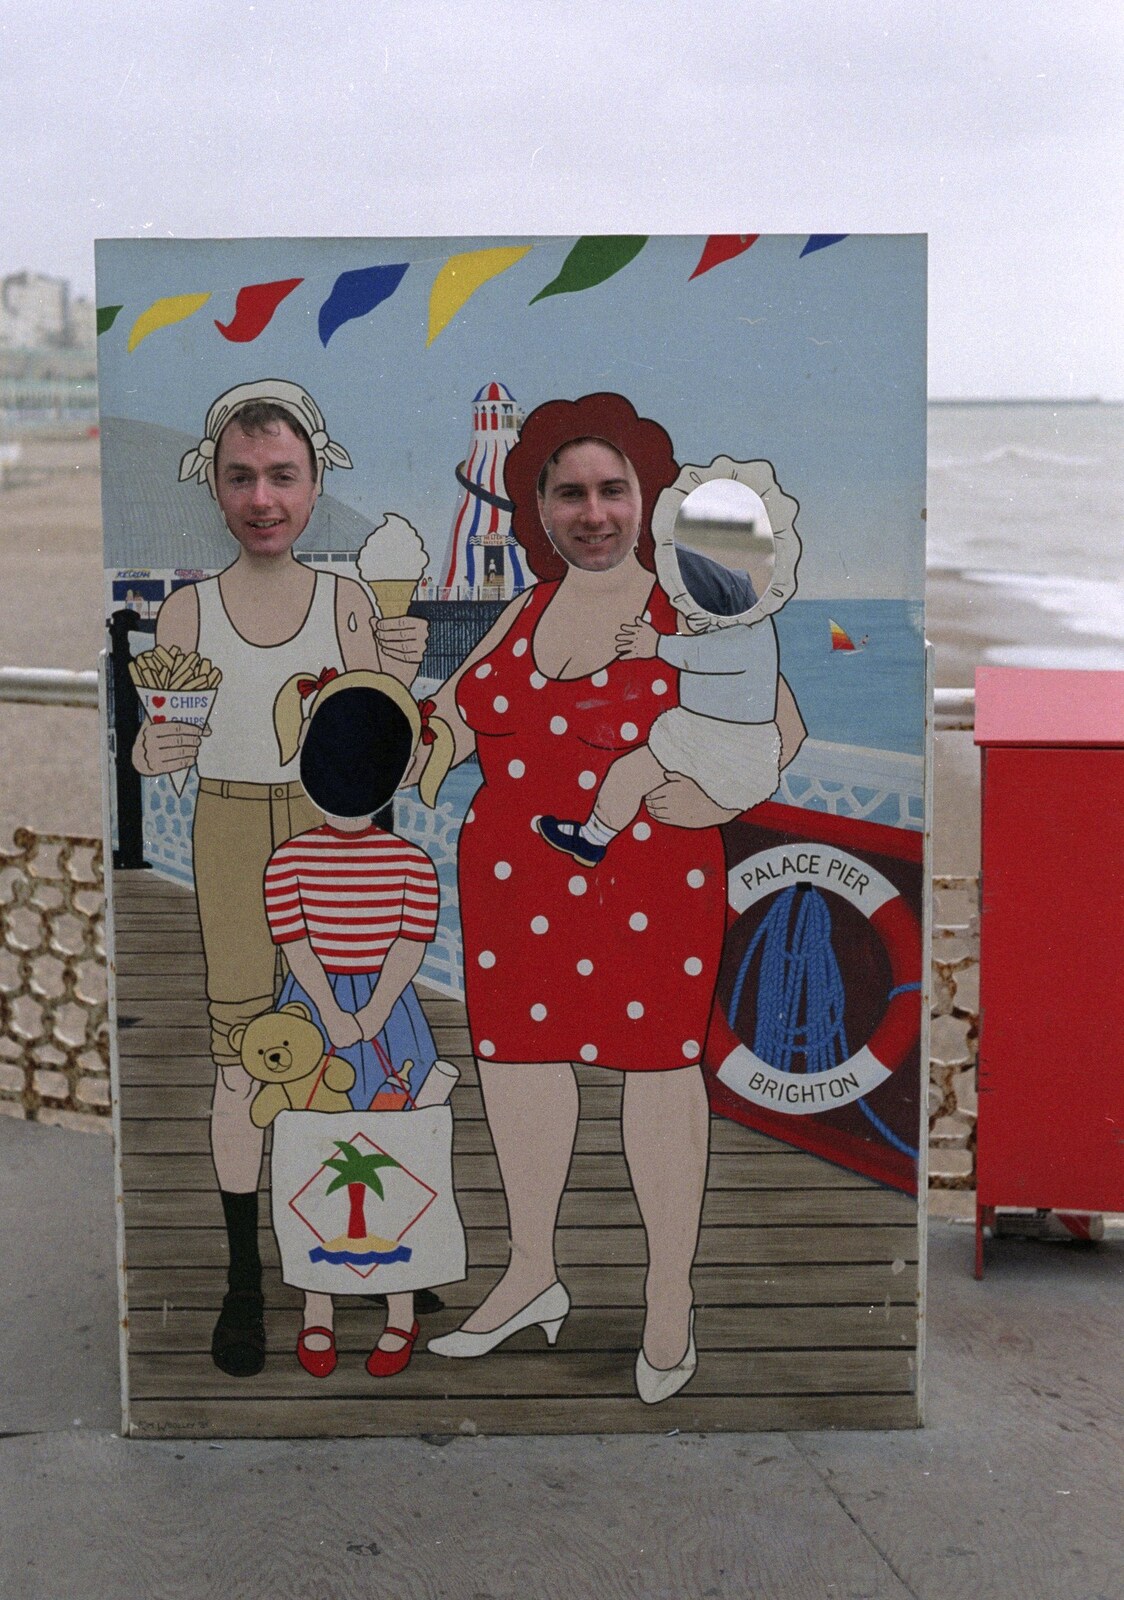 Another seaside cutout photo from Brighton Rock: Visiting Riki and John, Brighton, East Sussex - 5th March 1990